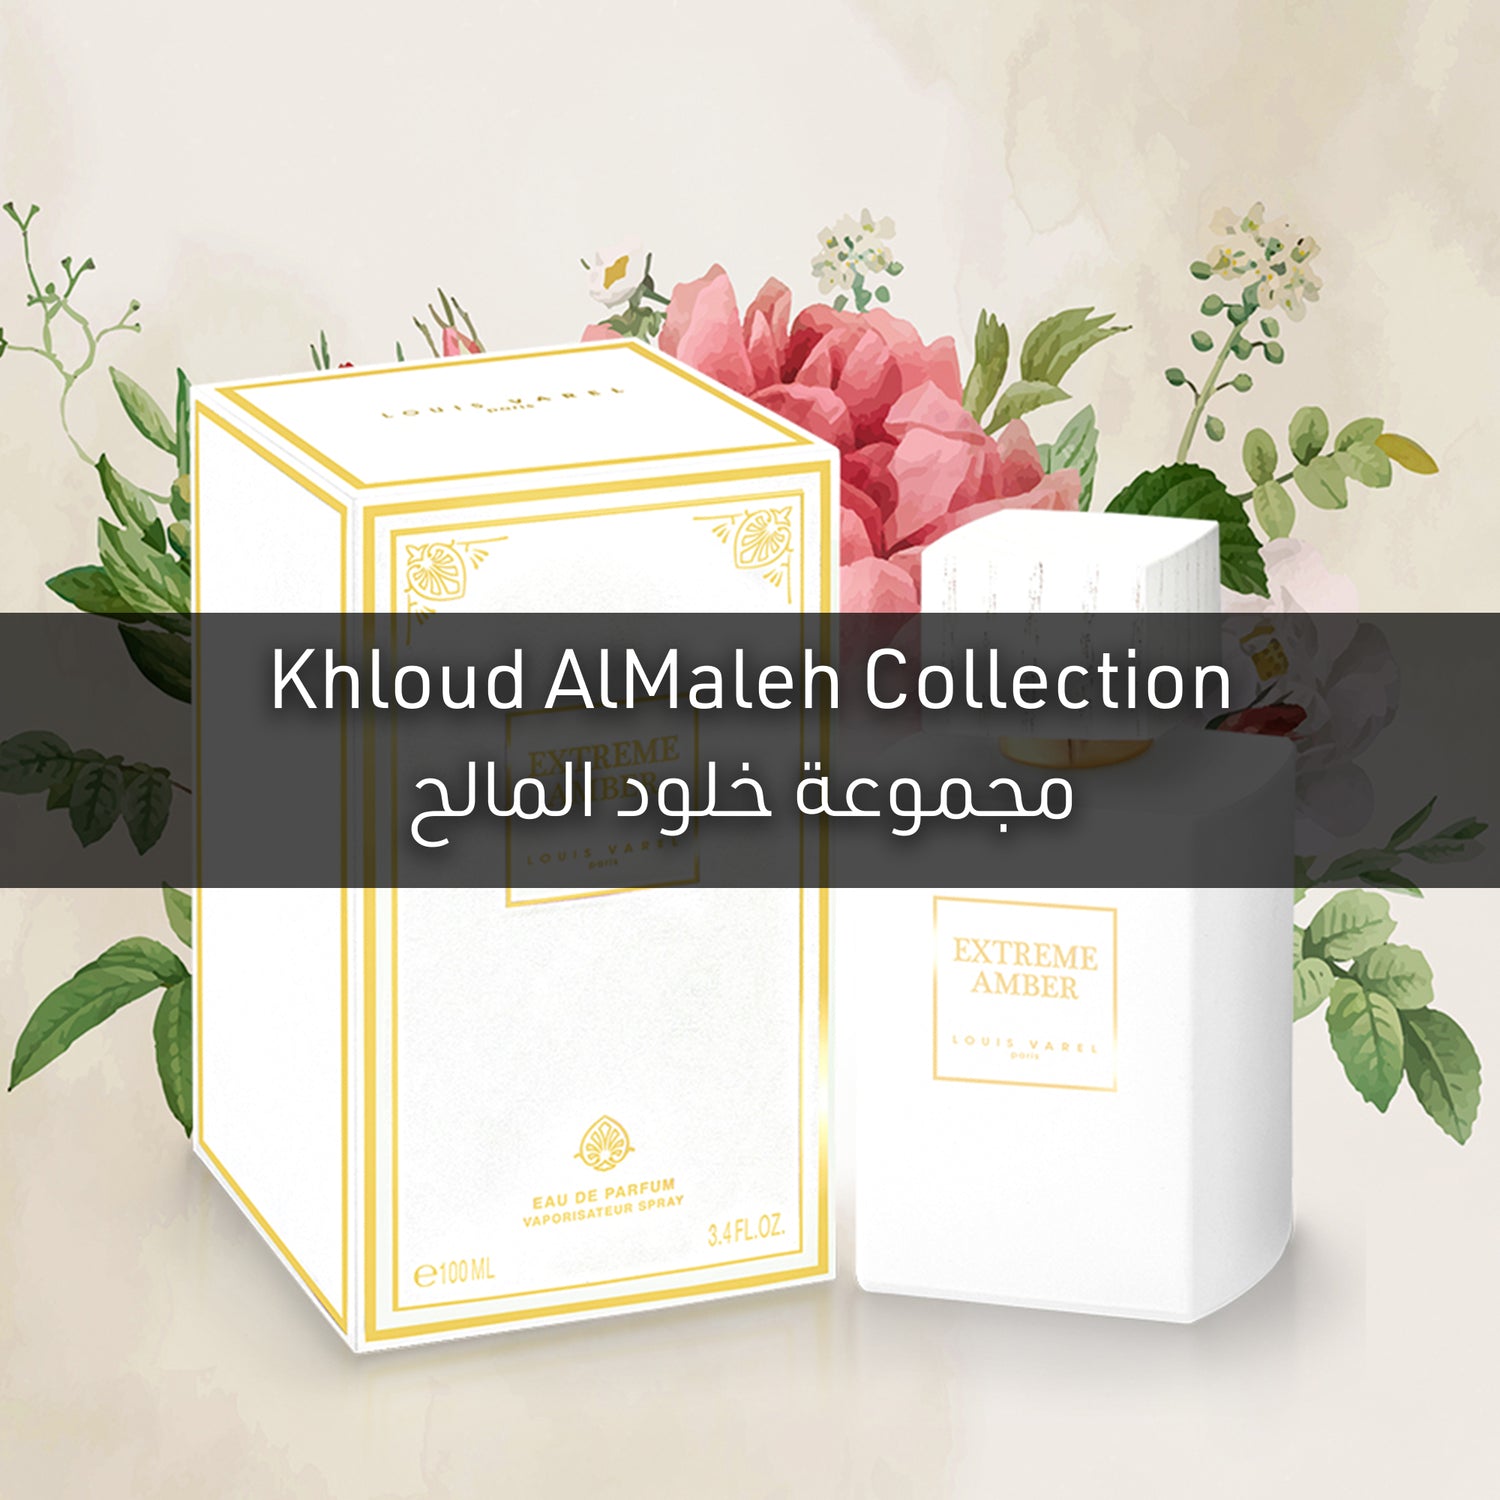 Khloud AlMaleh Collection